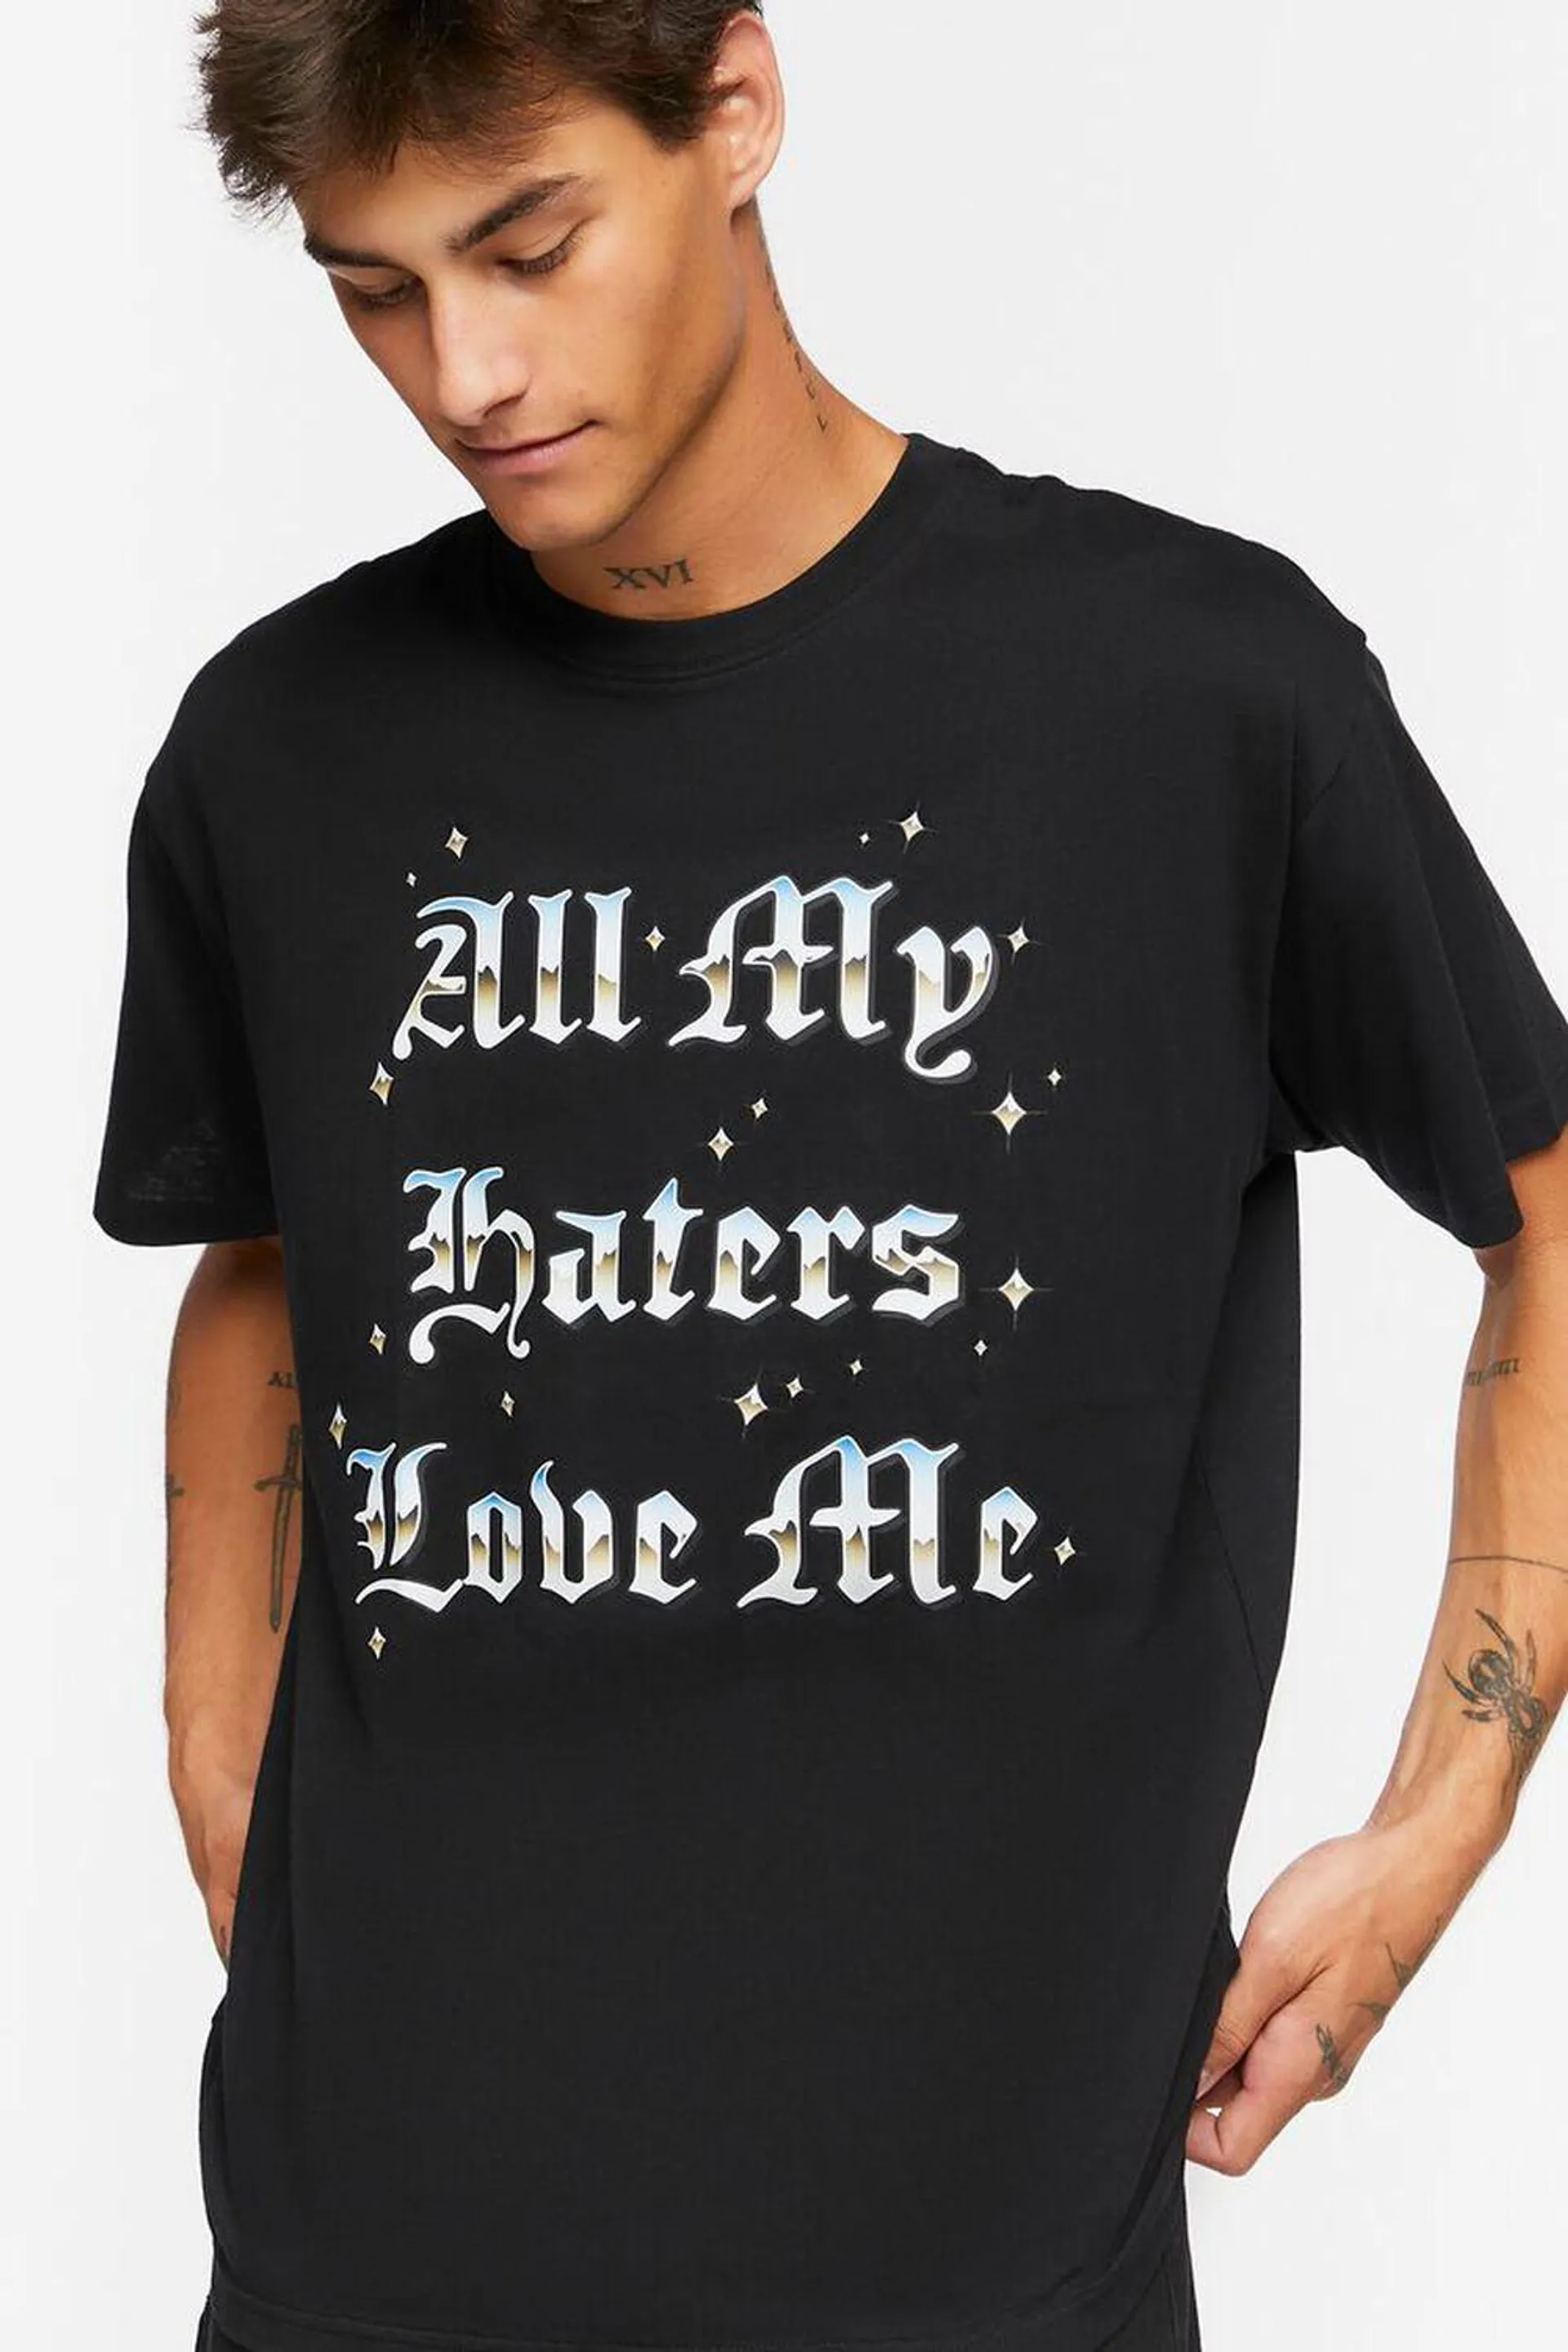 All My Haters Love Me Graphic Tee